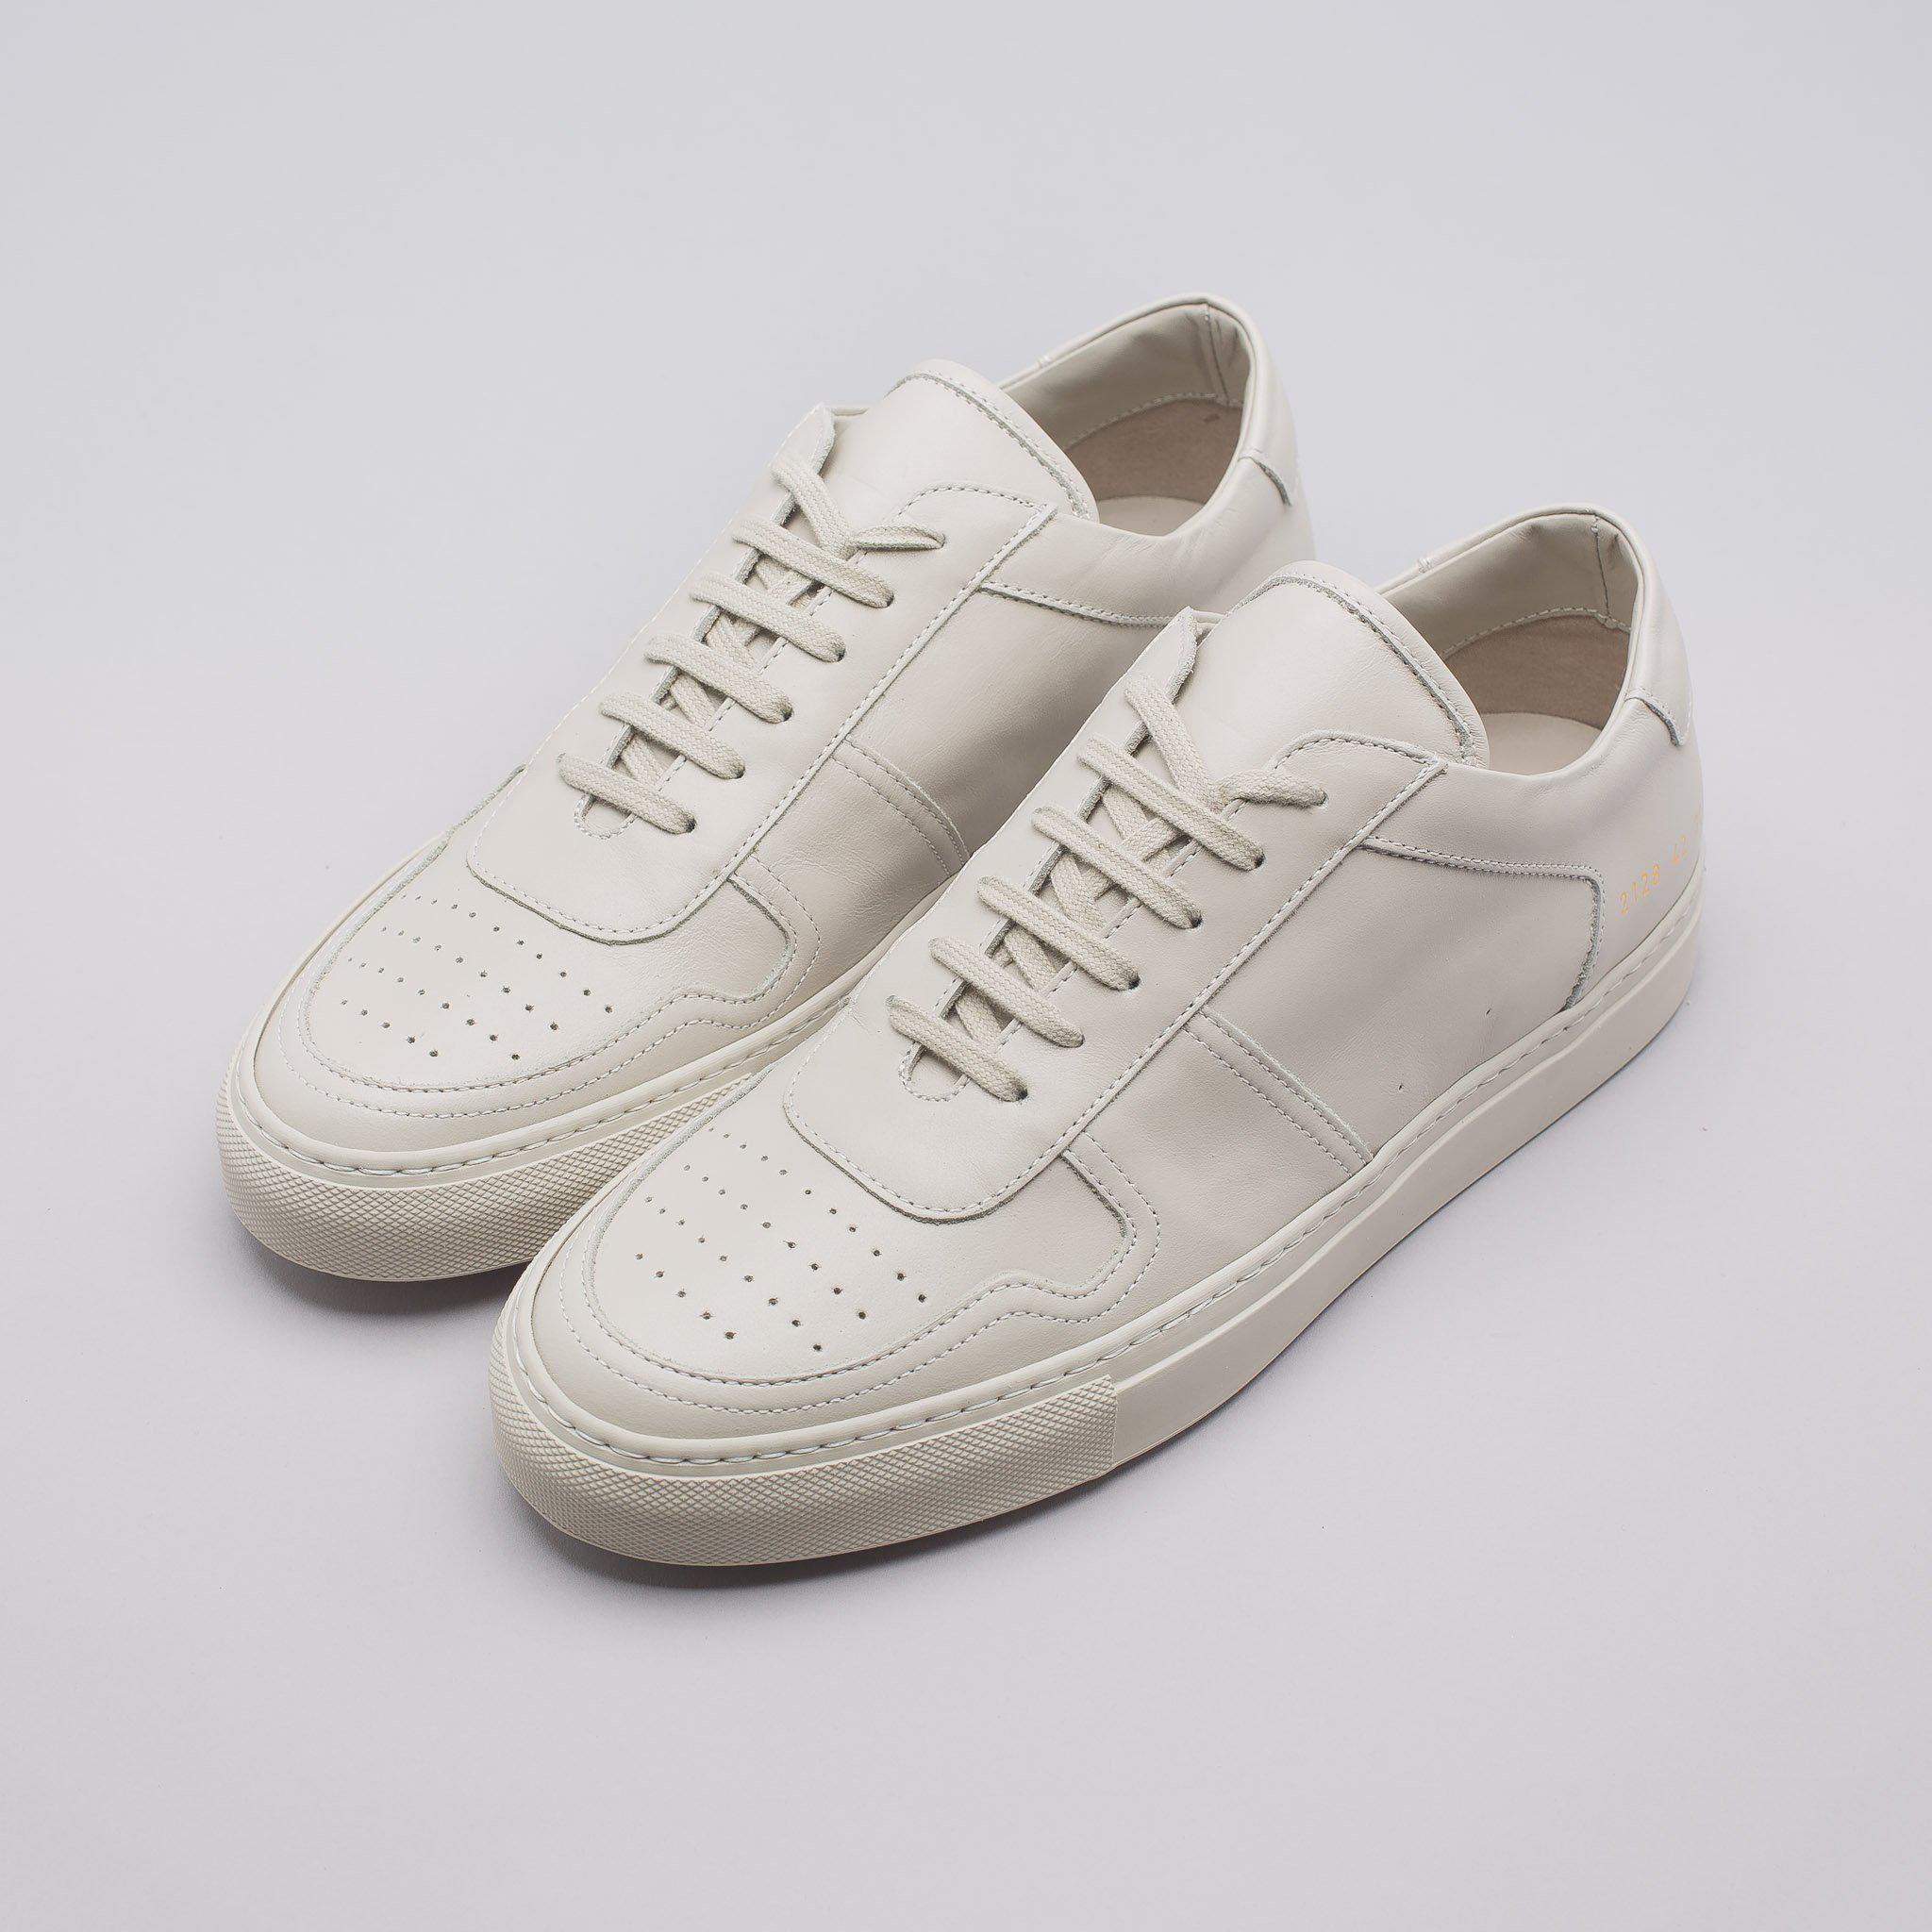 common projects basketball